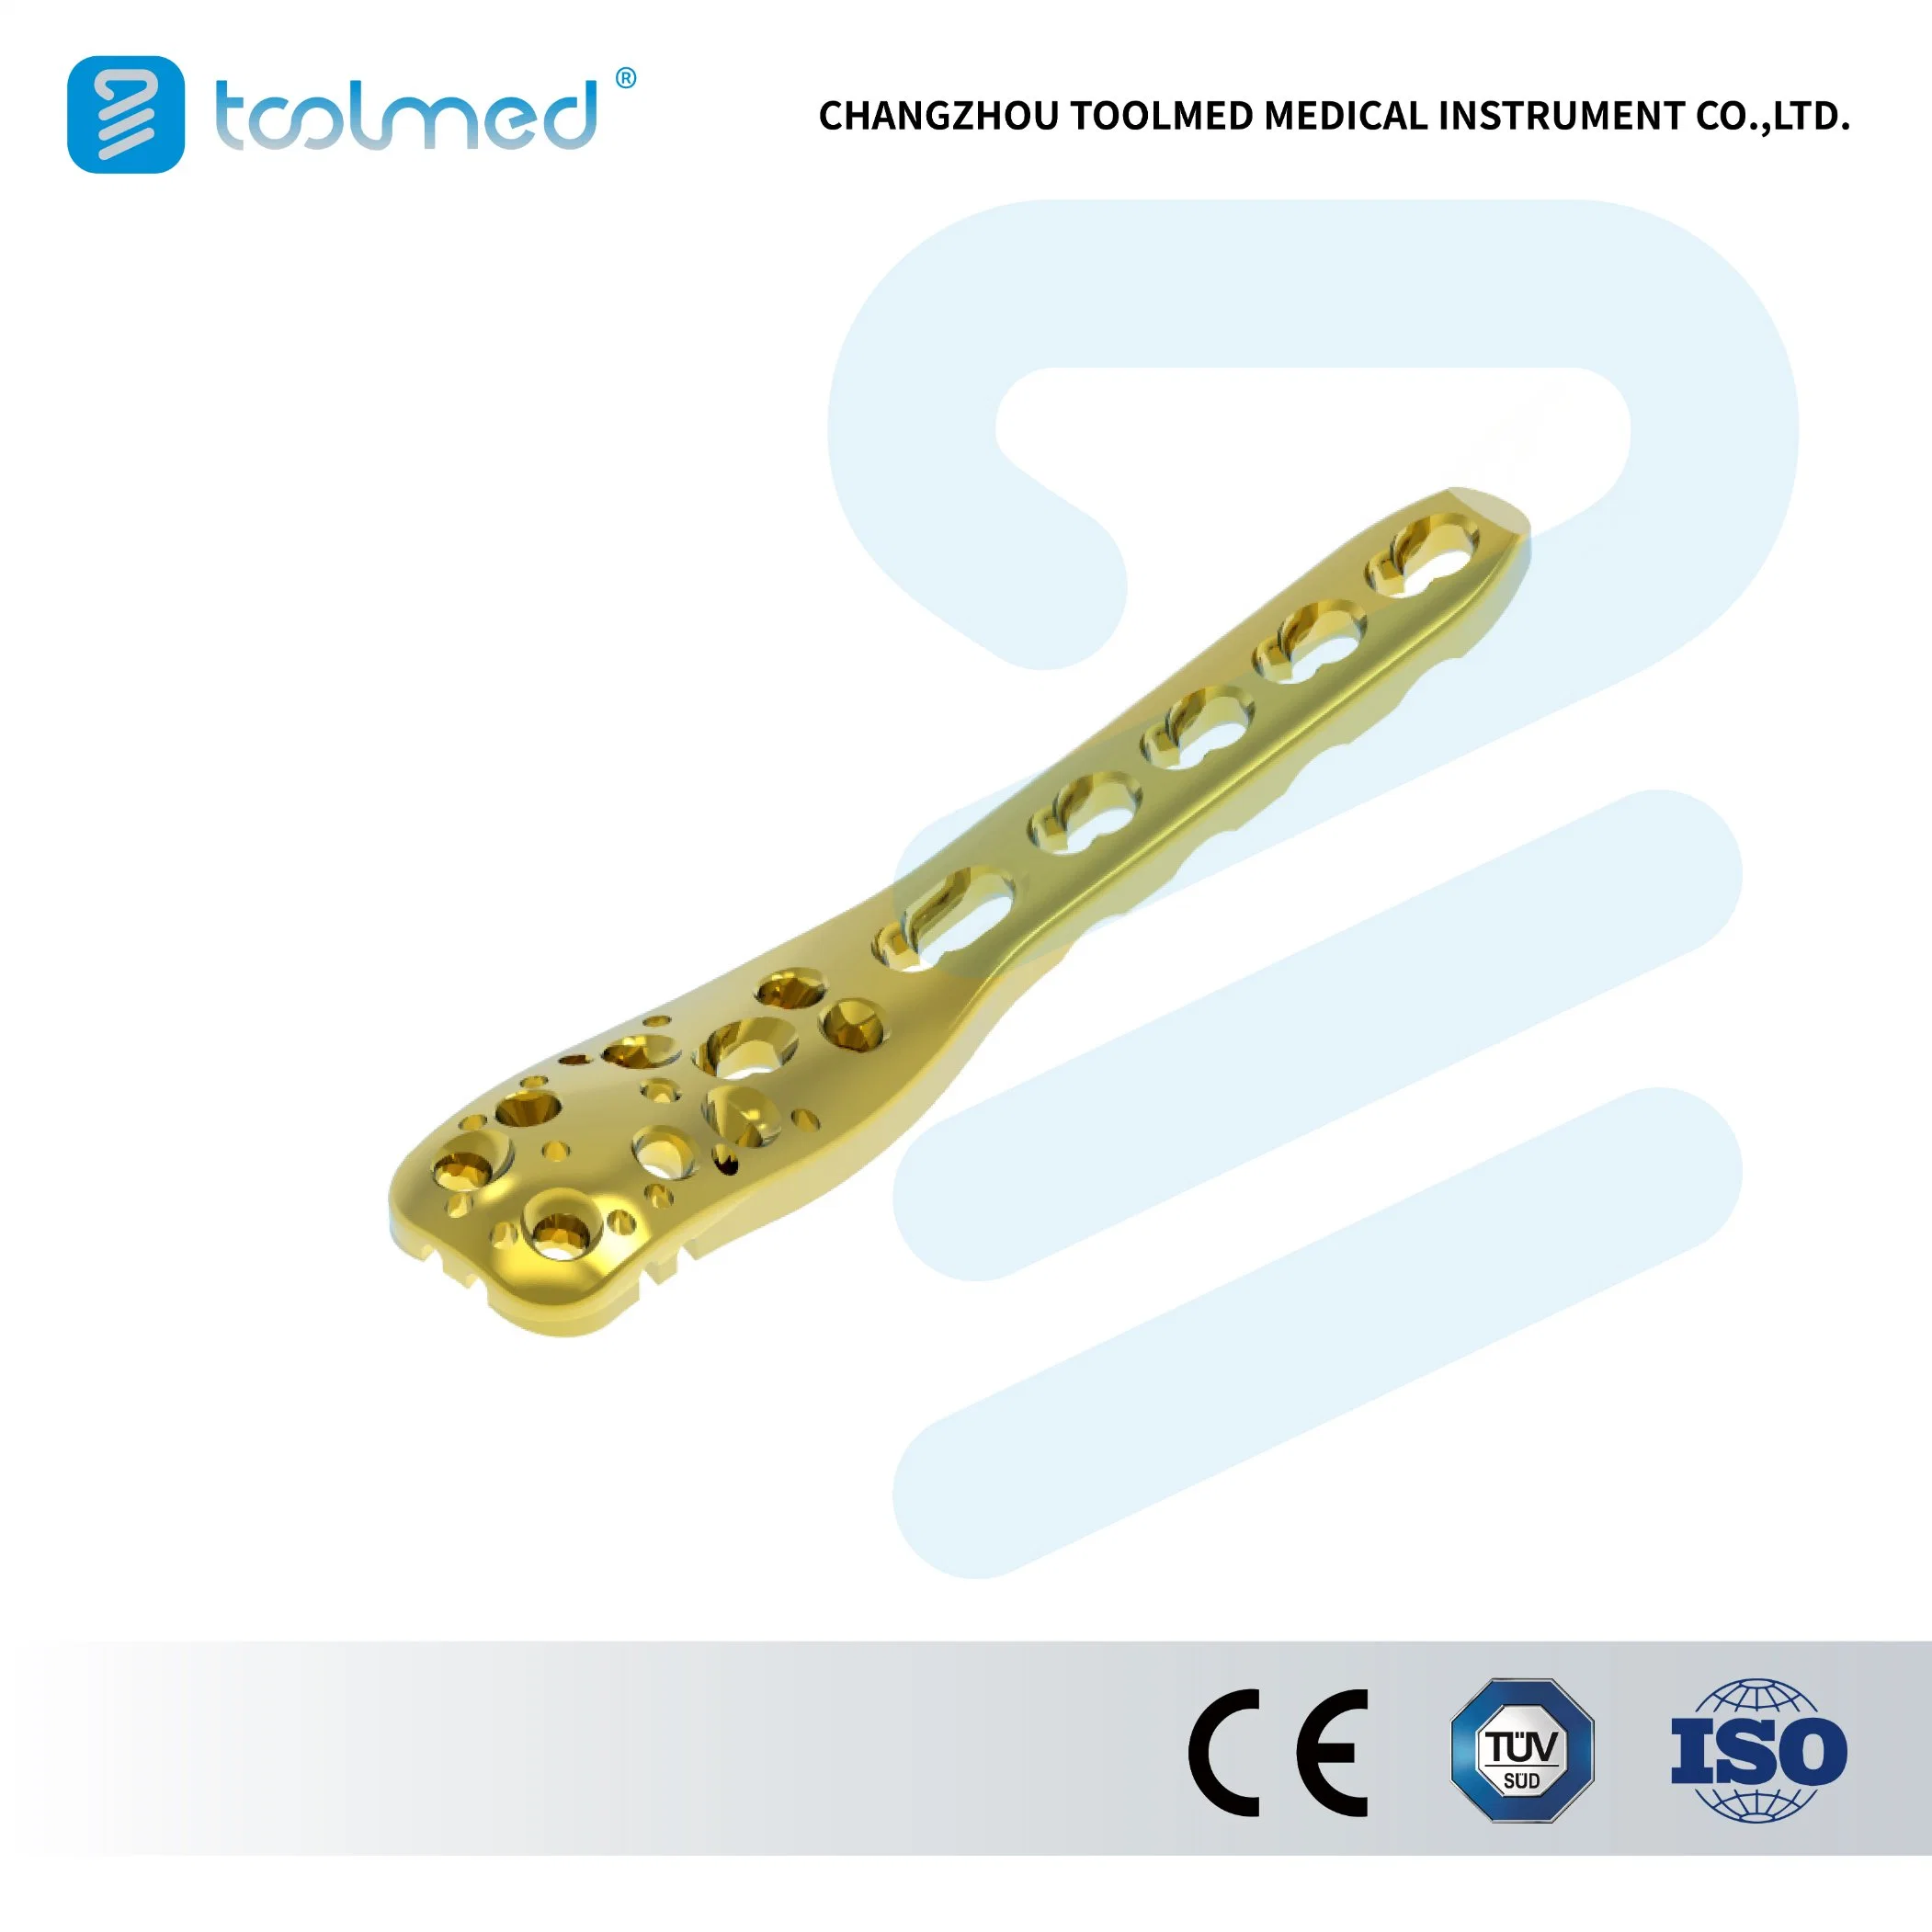 Standard Proximal Humeral Locking Compression Bone Plate, Small Fragment LCP System, Titanium, Orthopedic Surgical Implant for Trauma Surgery, Medical Products